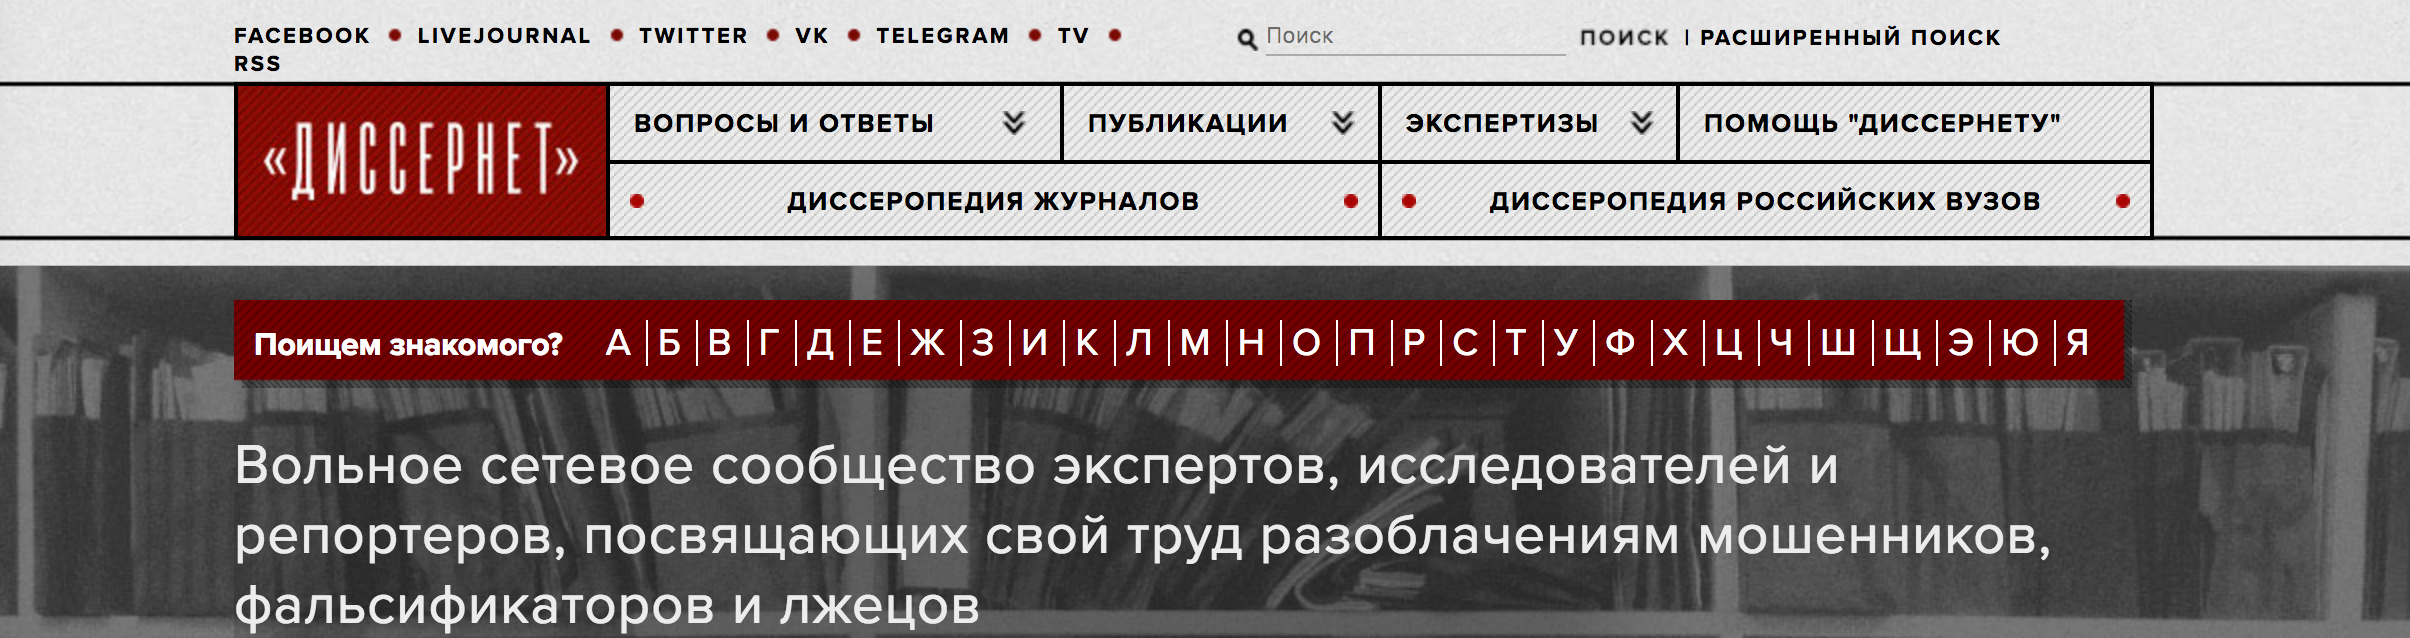 Screenshot of the Russian website Dissernet, which exposes cases of plagiarized dissertations.